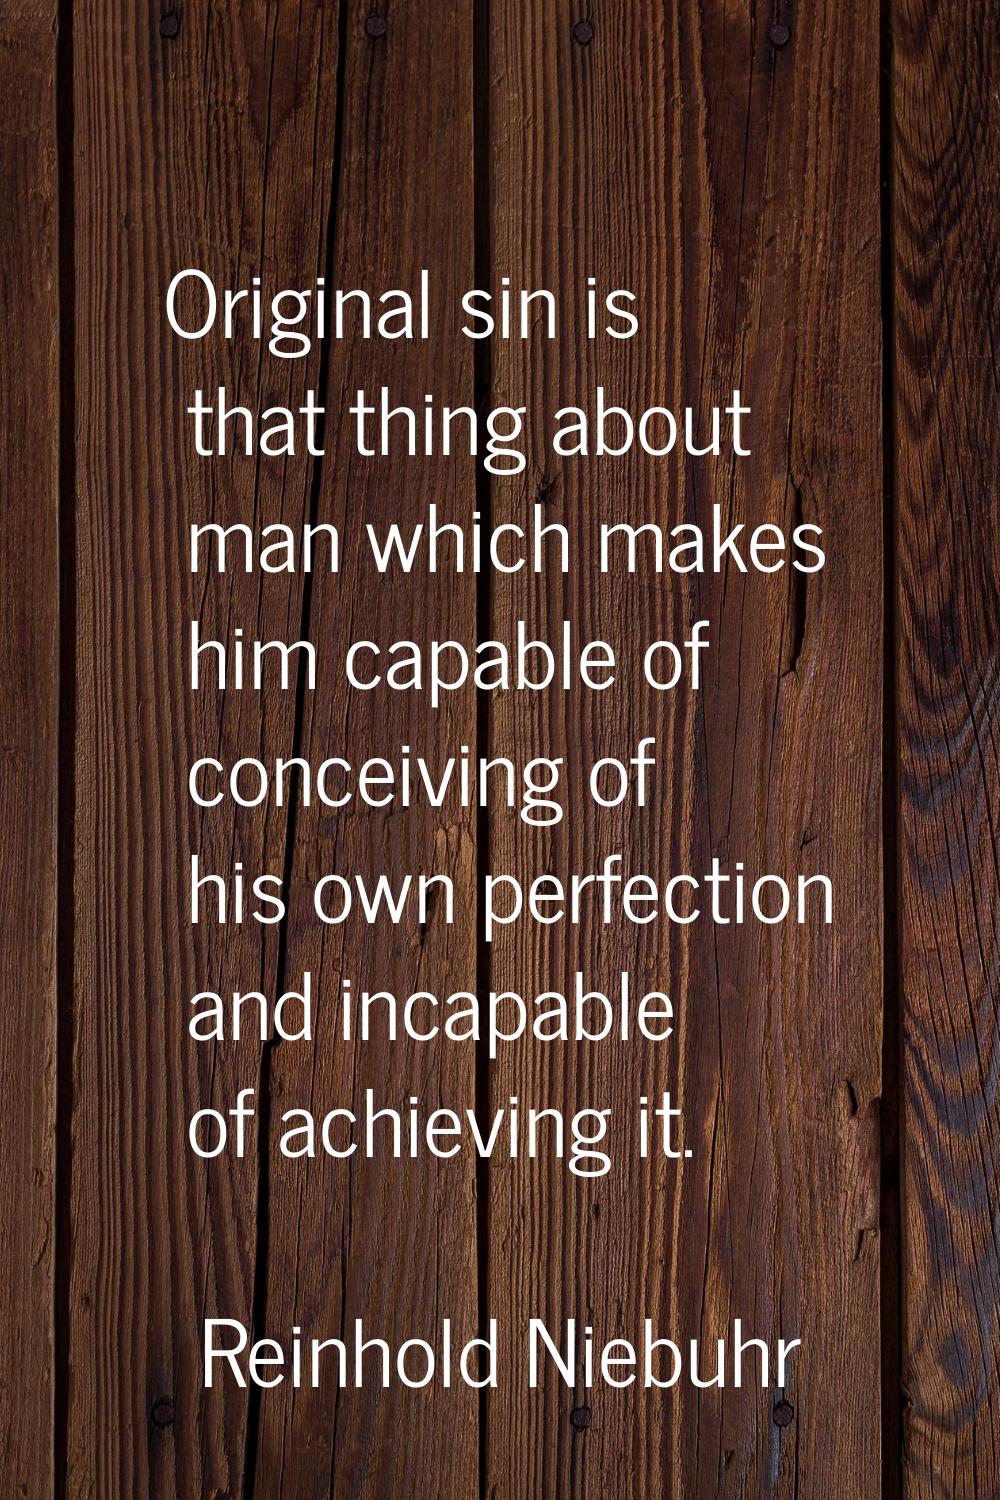 Original sin is that thing about man which makes him capable of conceiving of his own perfection an